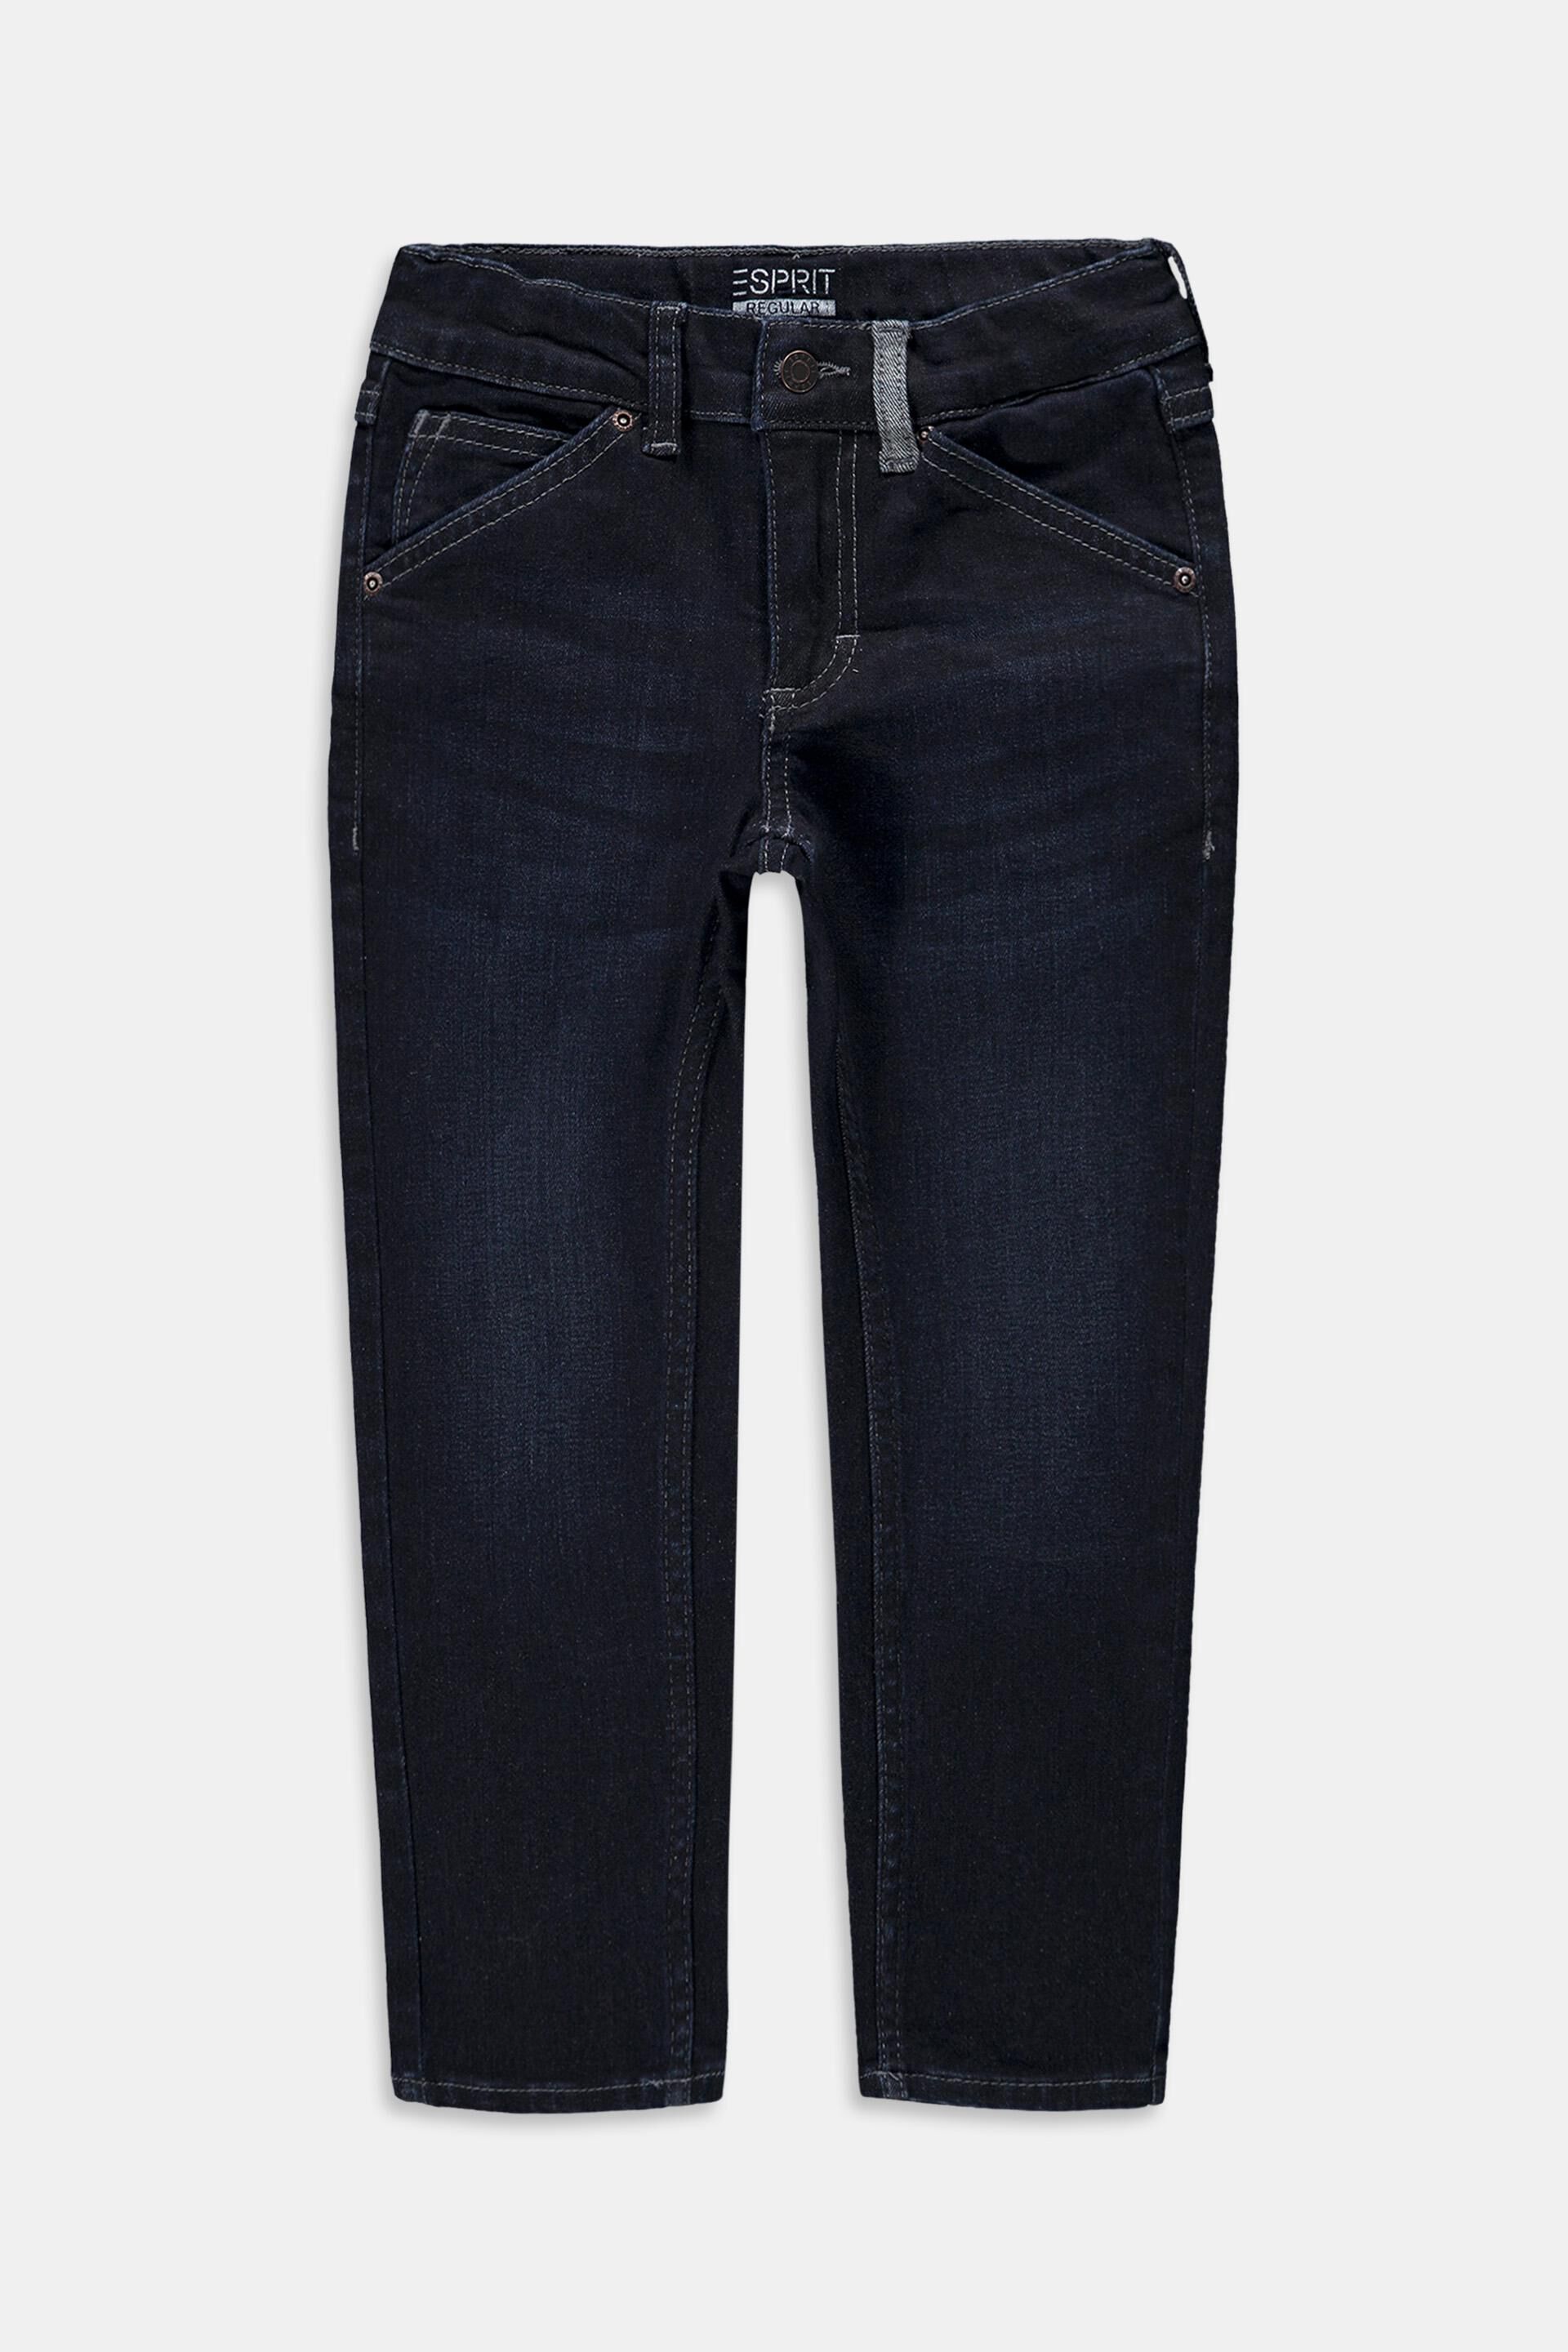 Esprit Jeans adjustable with waistband